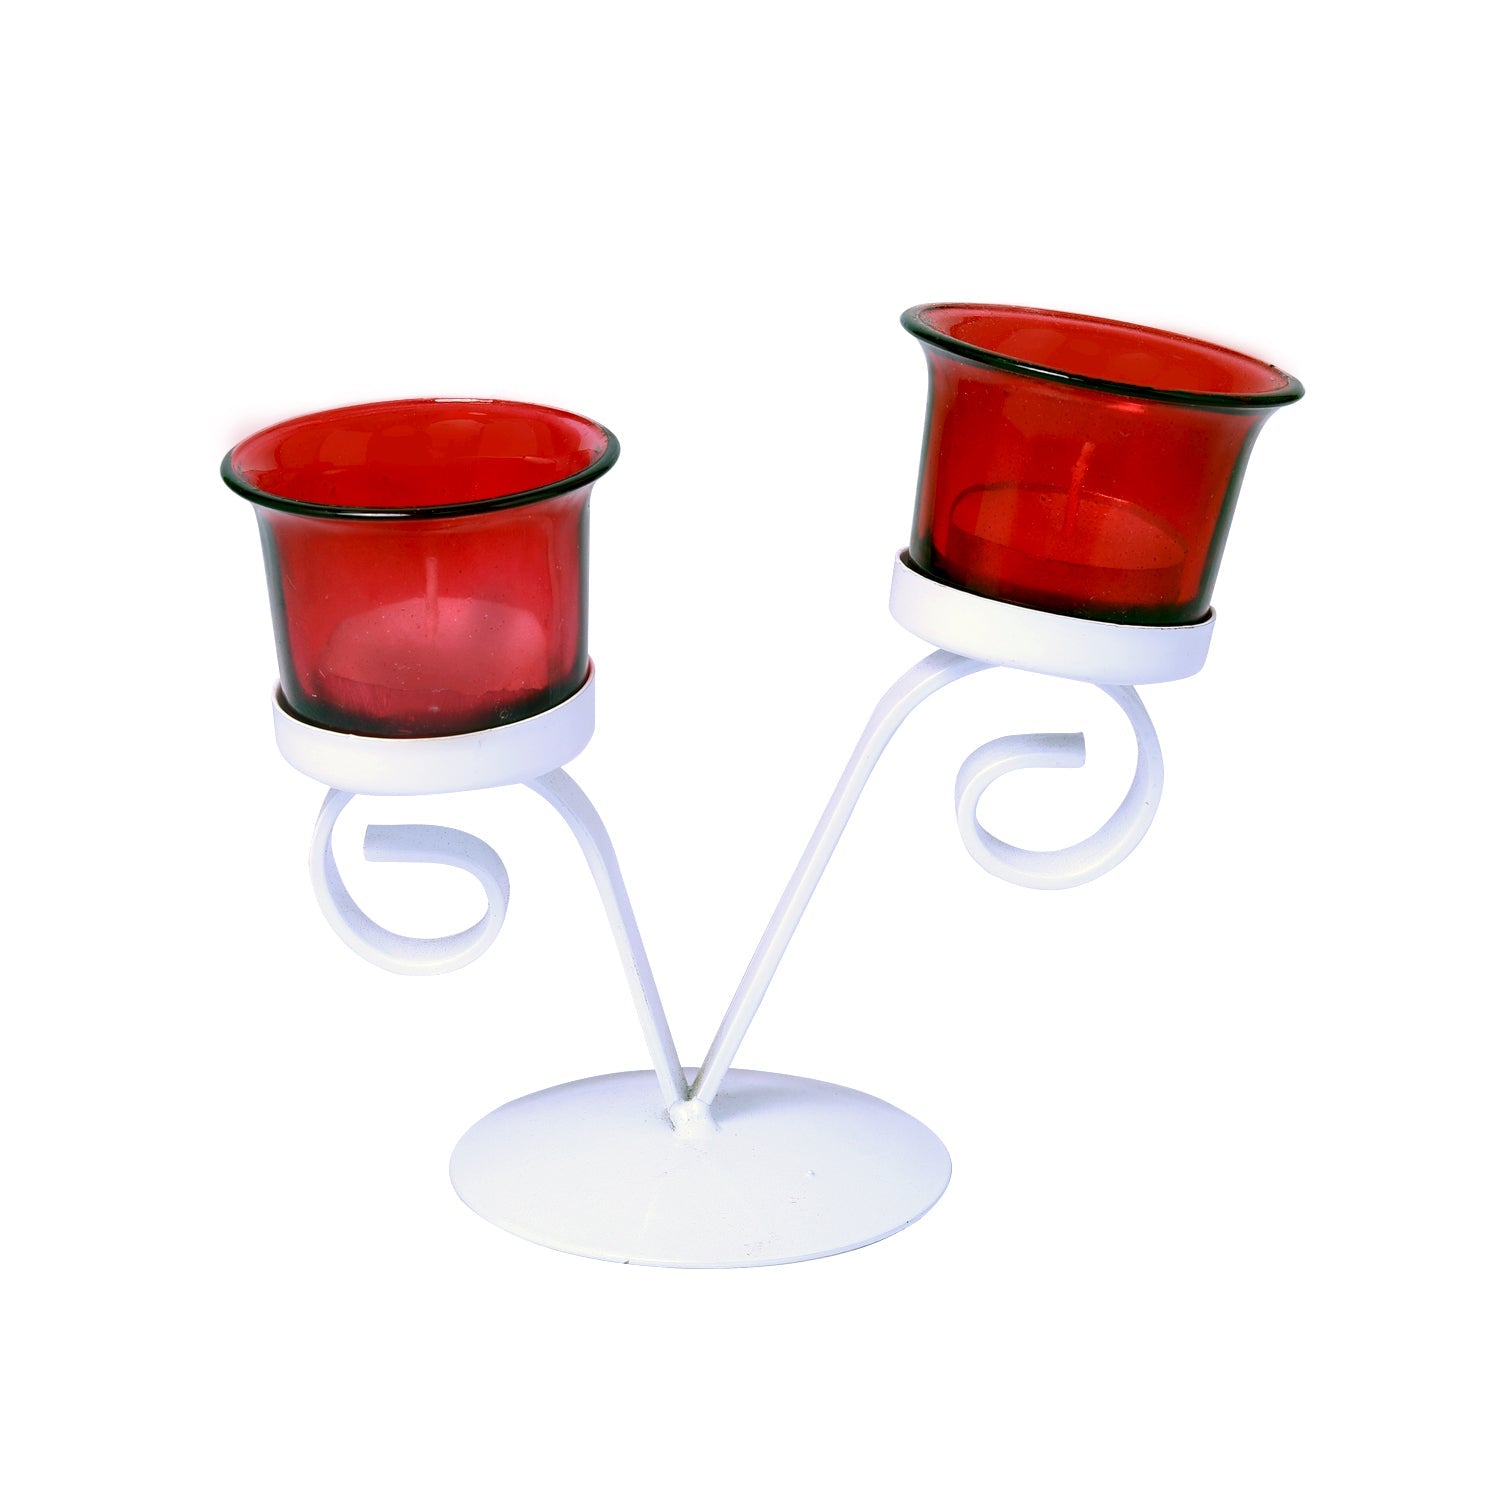 Hosley Decorative Tealight Candle Holder with 2 Red Glasses for Home Decoration, Pack of 1, White